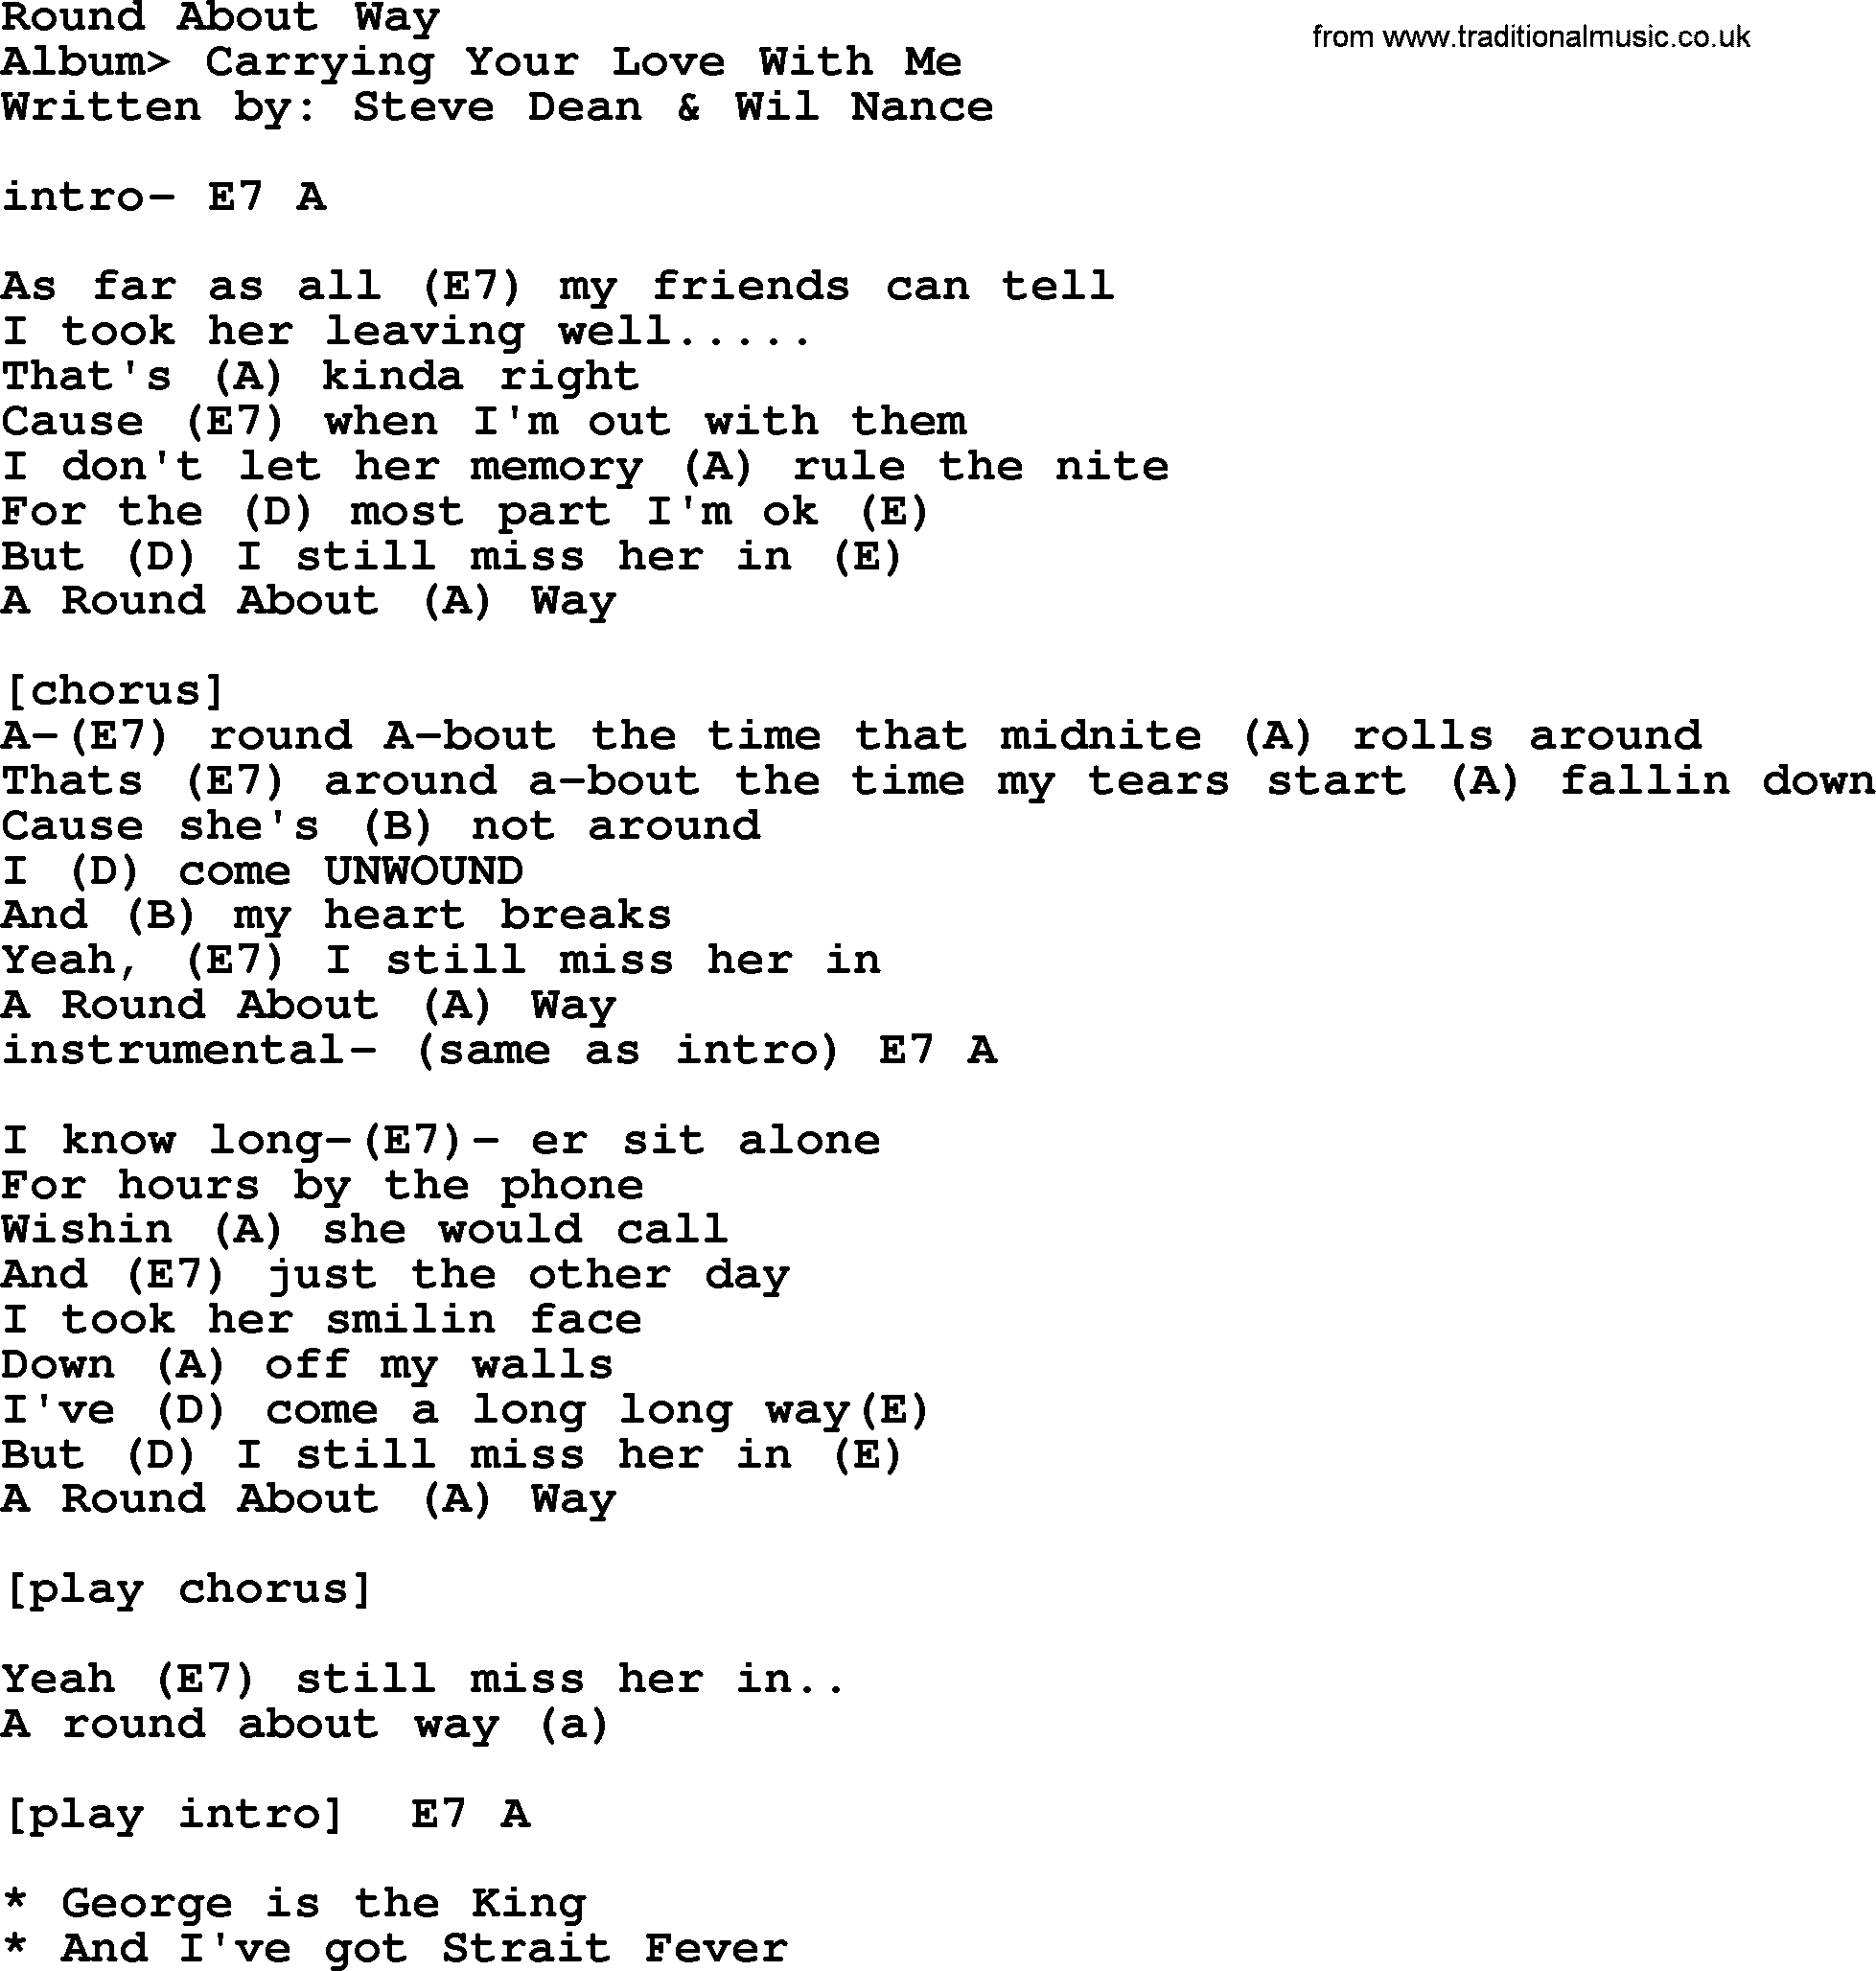 George Strait song: Round About Way, lyrics and chords